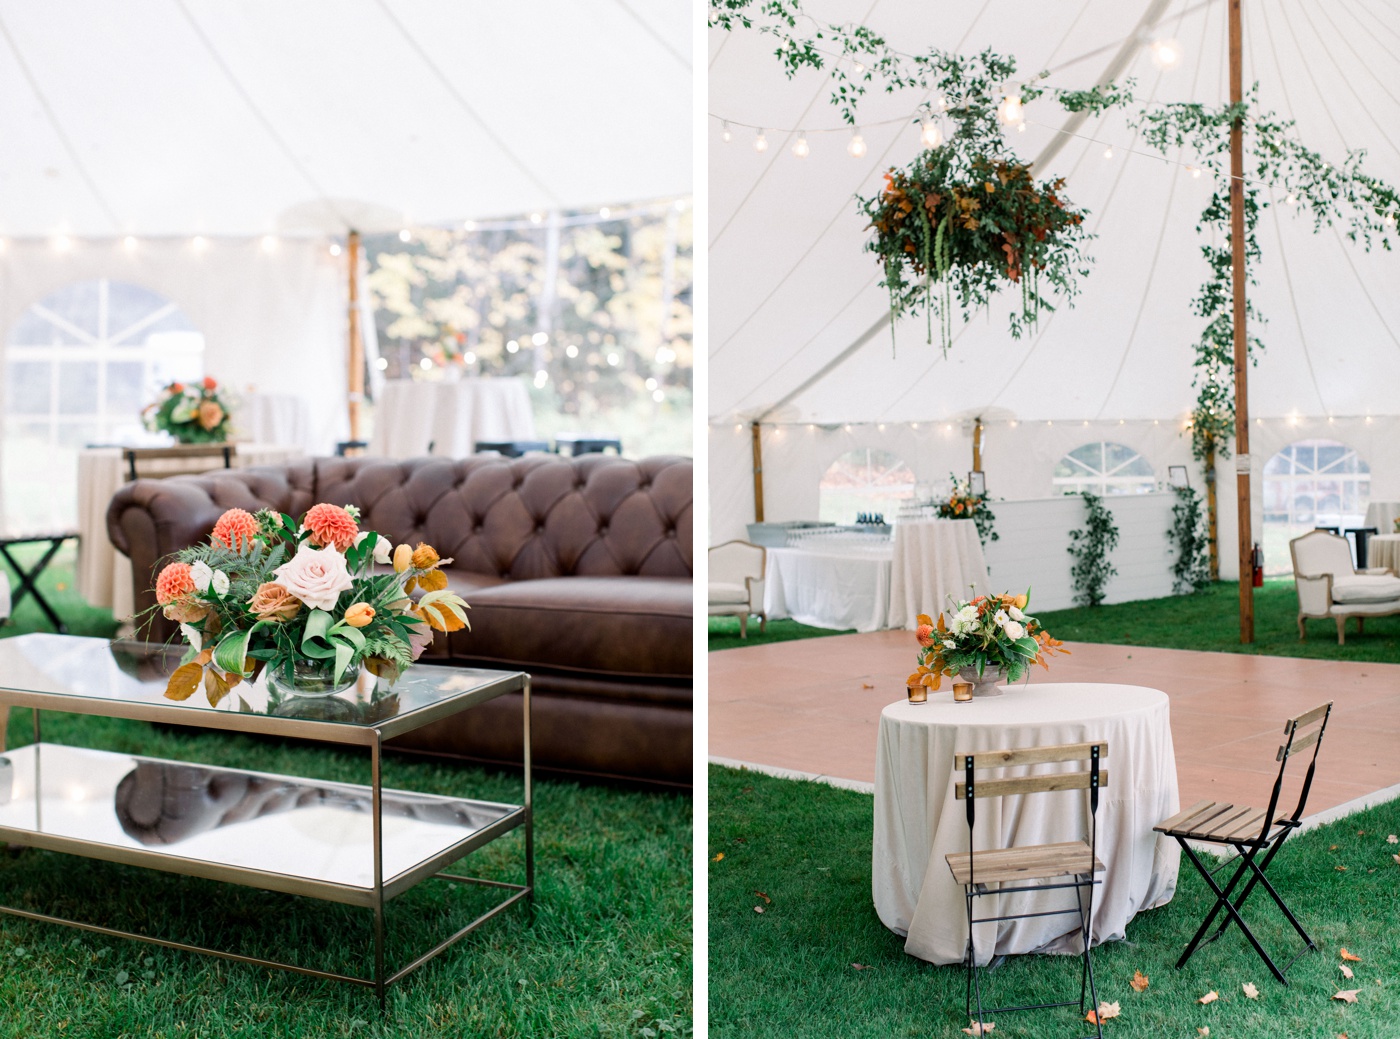 Lounge seating for a tented wedding reception